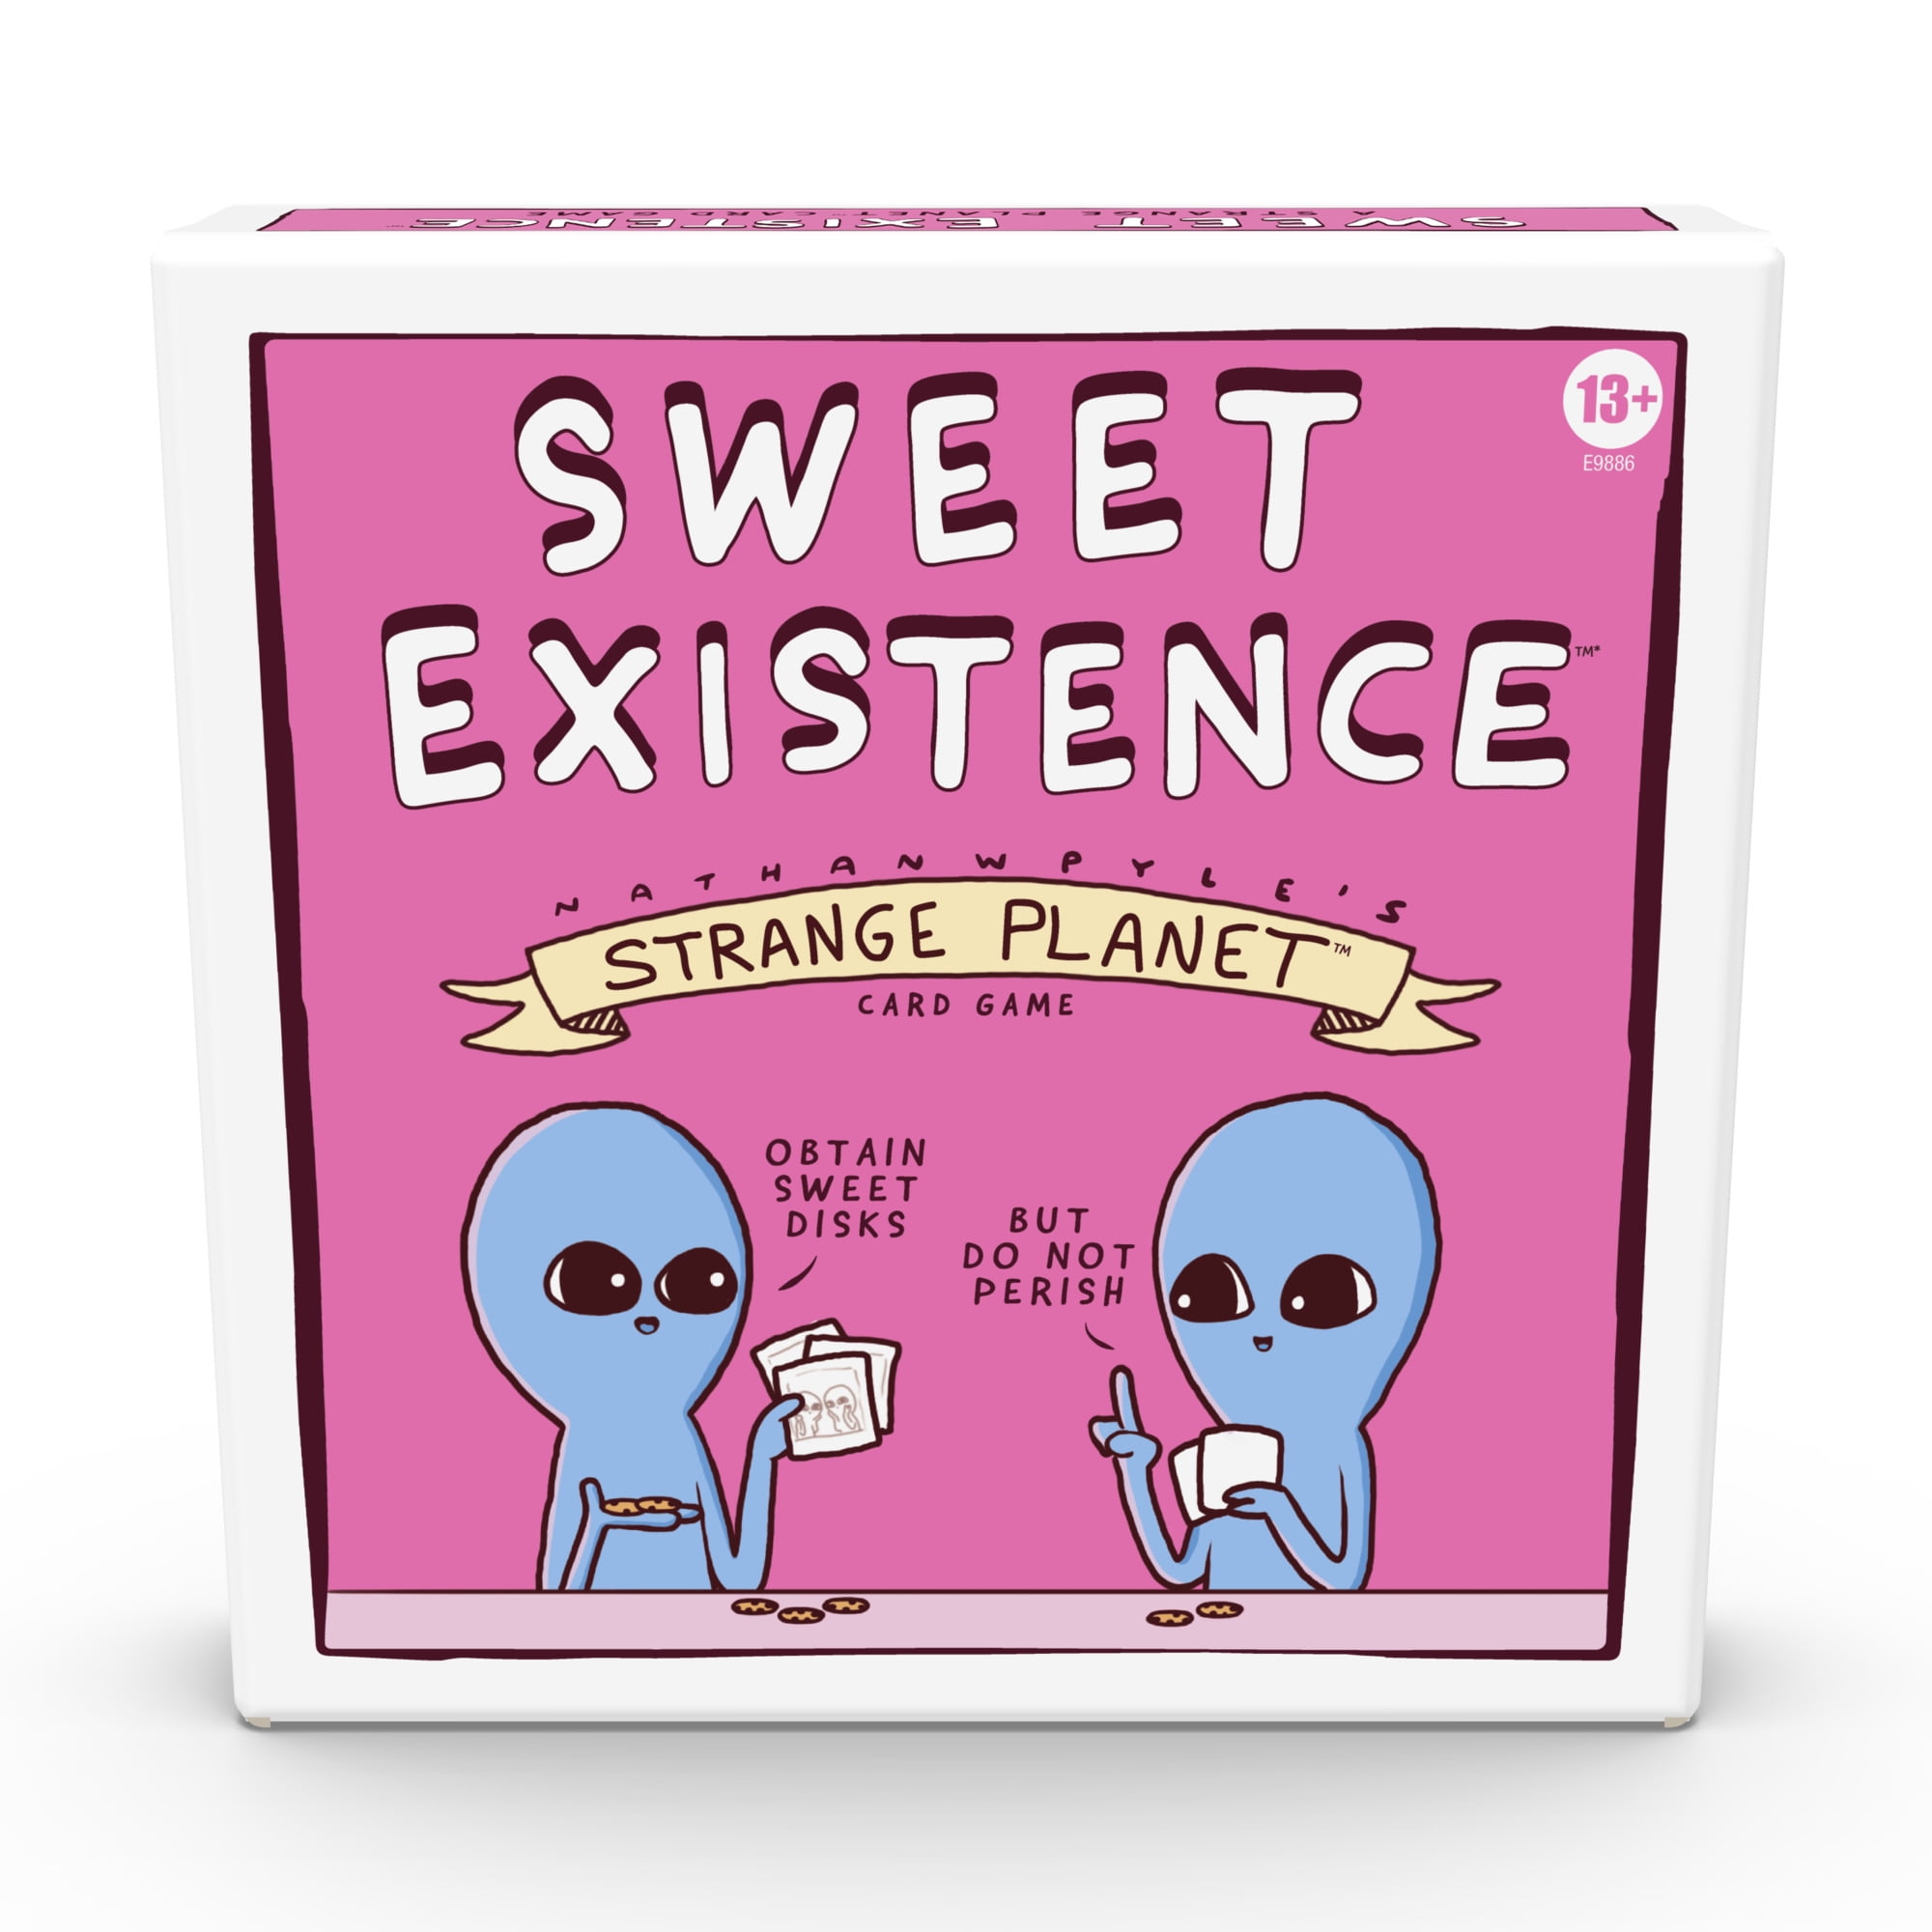 Sweet Existence A Strange Planet Card Game $4.05 + Free S&H w/ Walmart+ or $35+